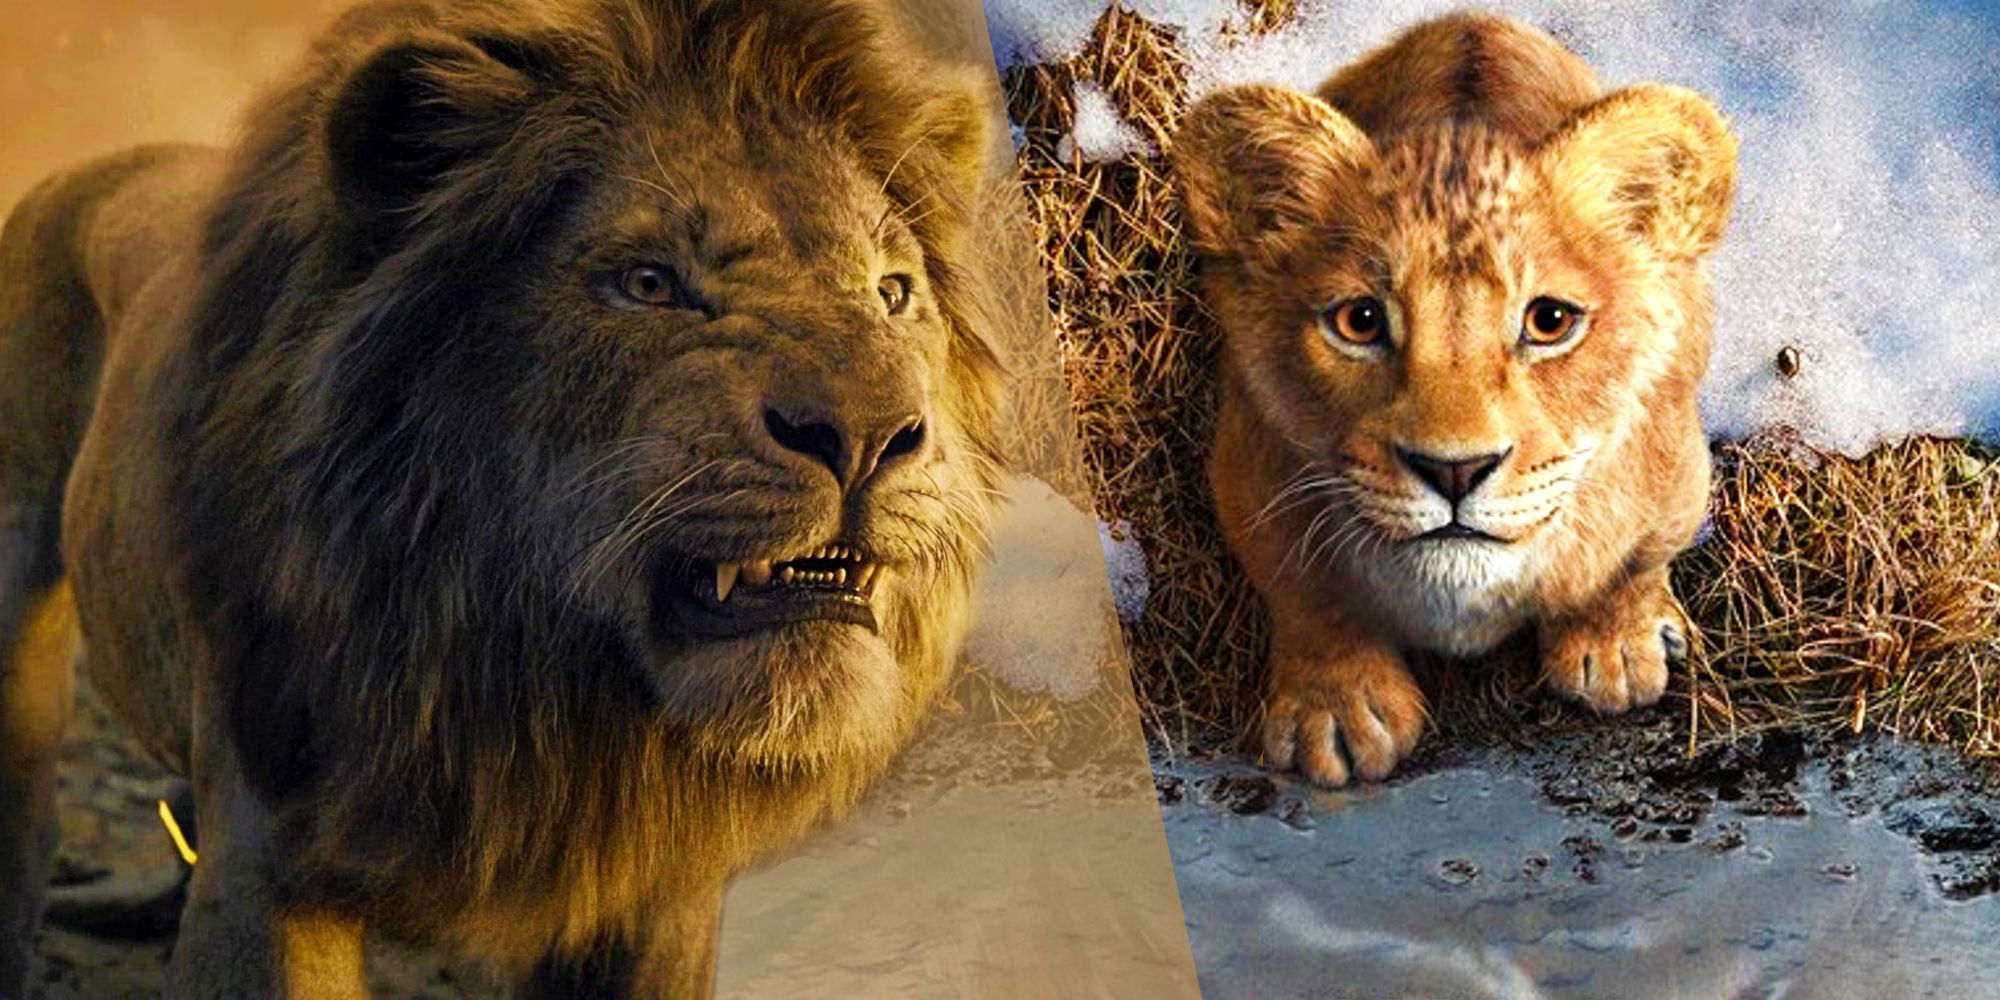 One Part Of Mufasa's Story Debunks The Biggest Criticism Of The Lion King Prequel